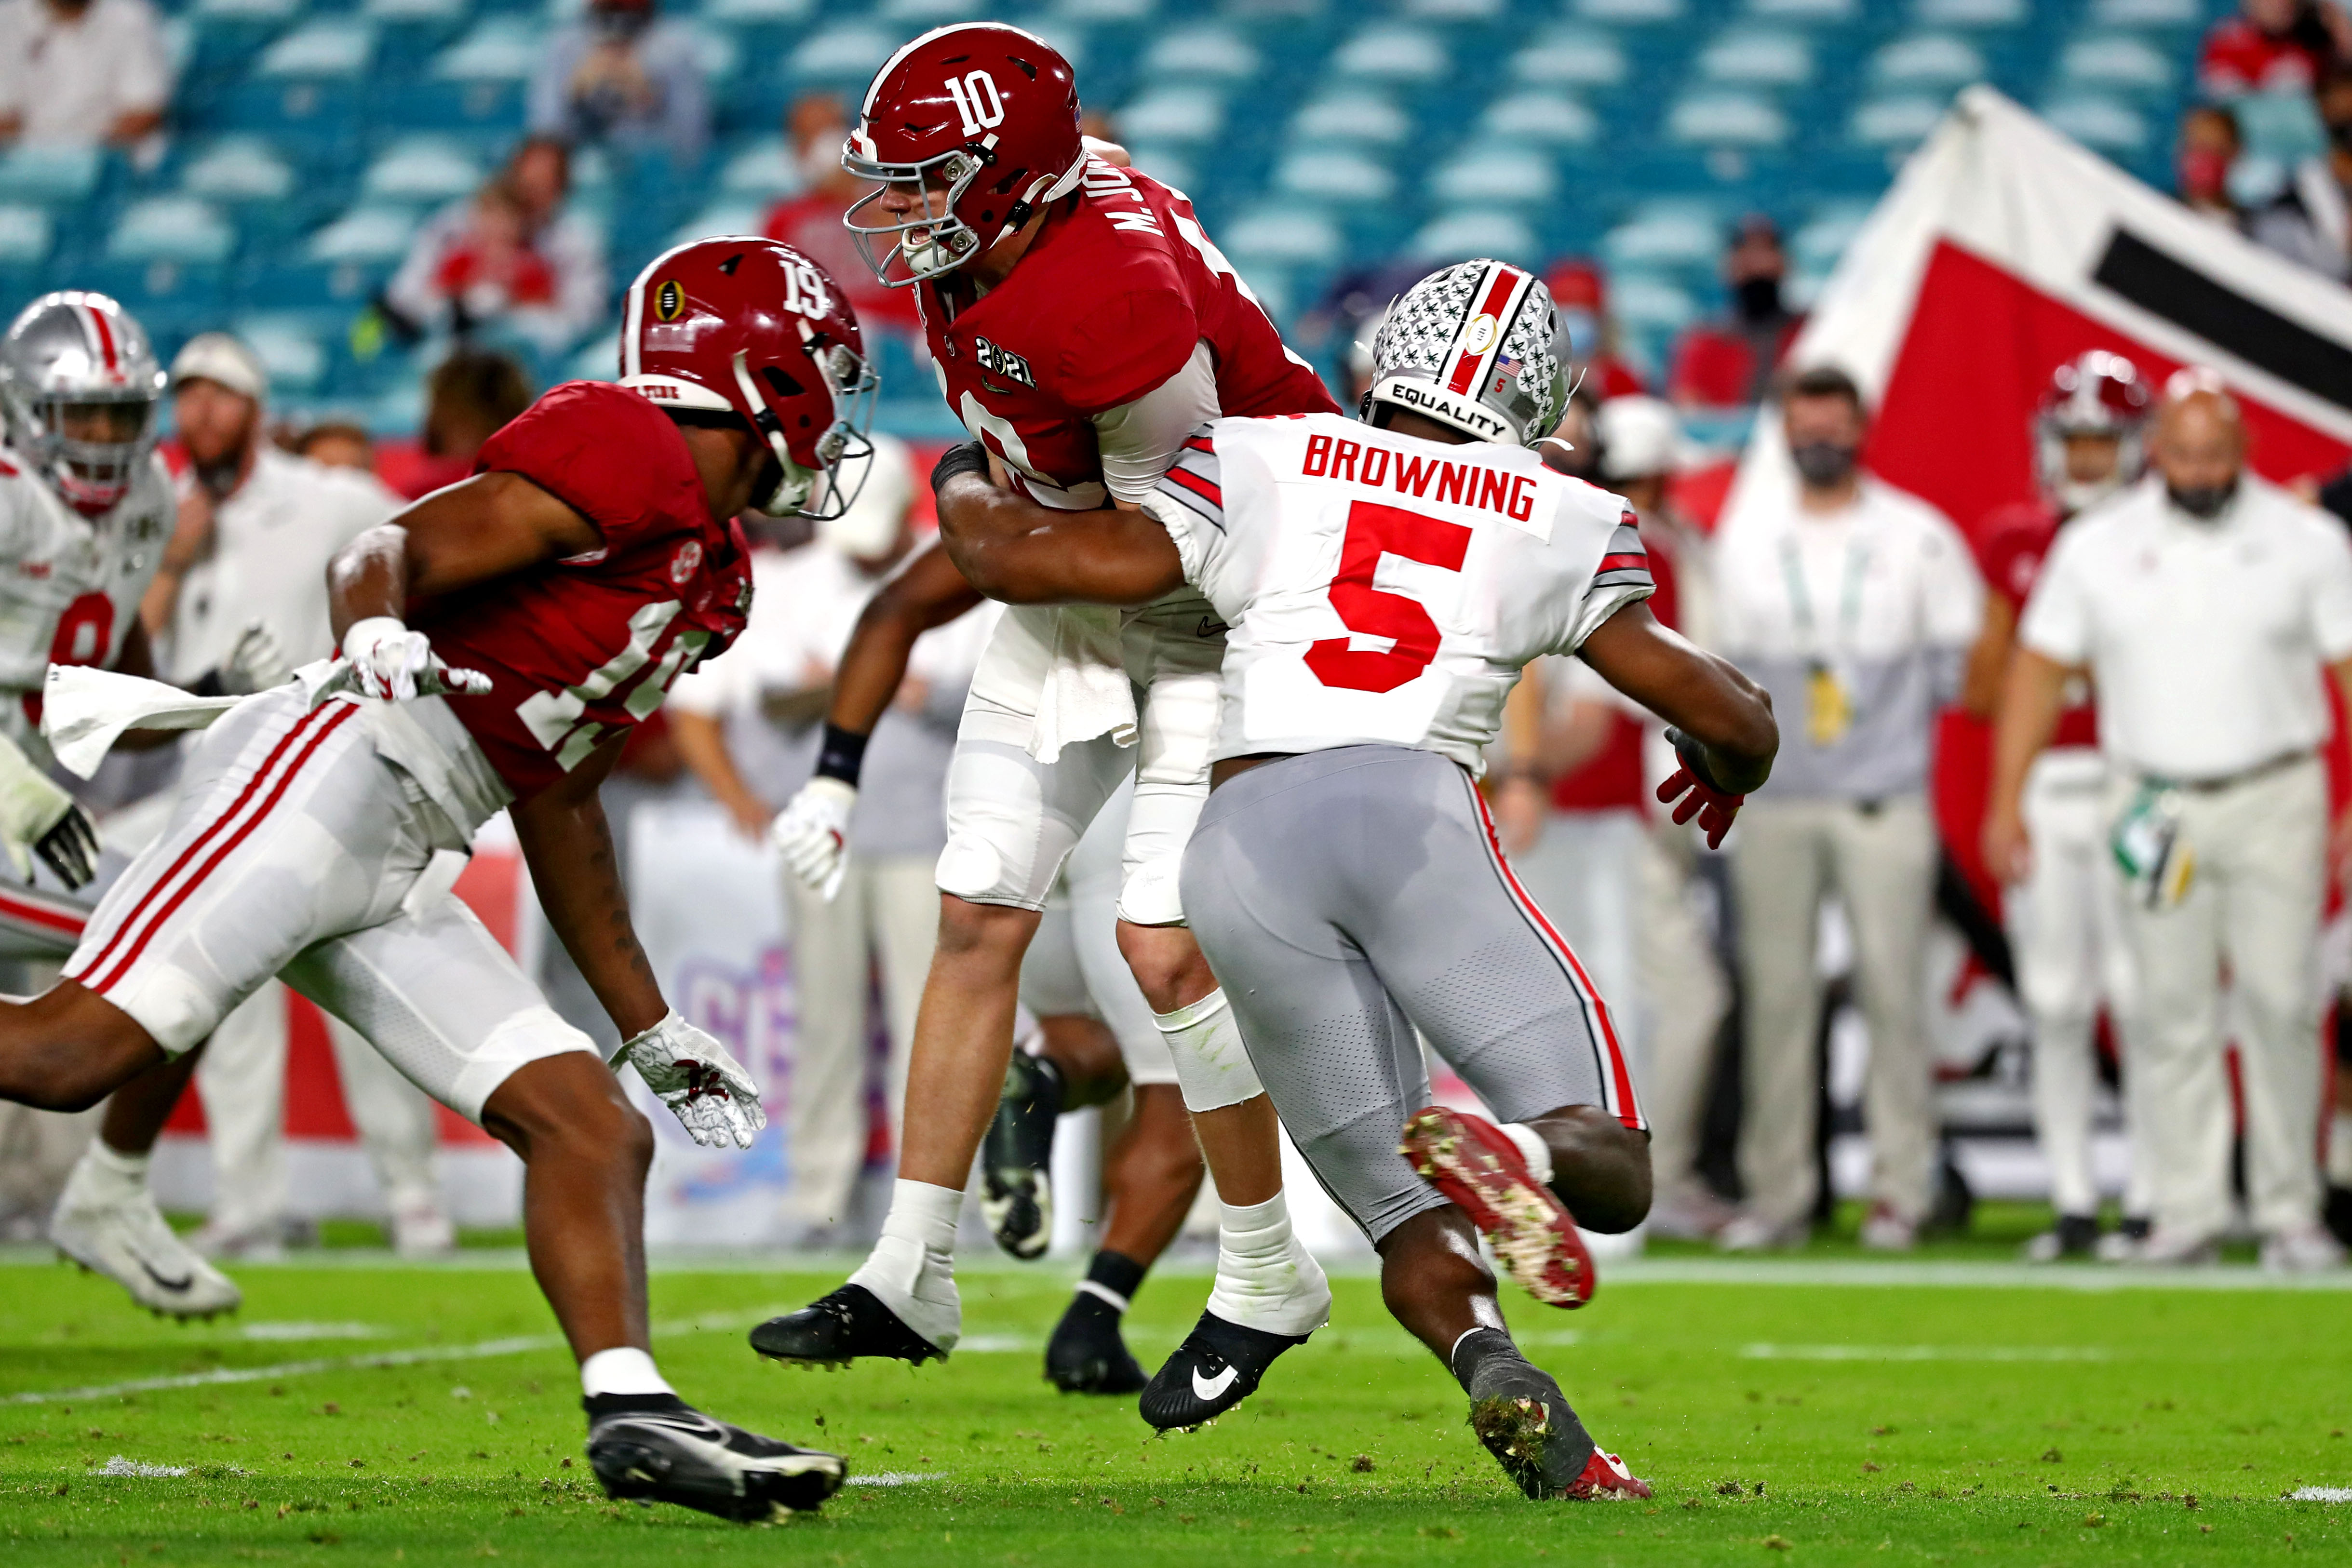 Ohio State Buckeyes linebacker Baron Browning (5) forces Alabama Crimson Tide quarterback Mac Jones (10) to fumble during the second quarter in the 2021 College Football Playoff National Championship Game.